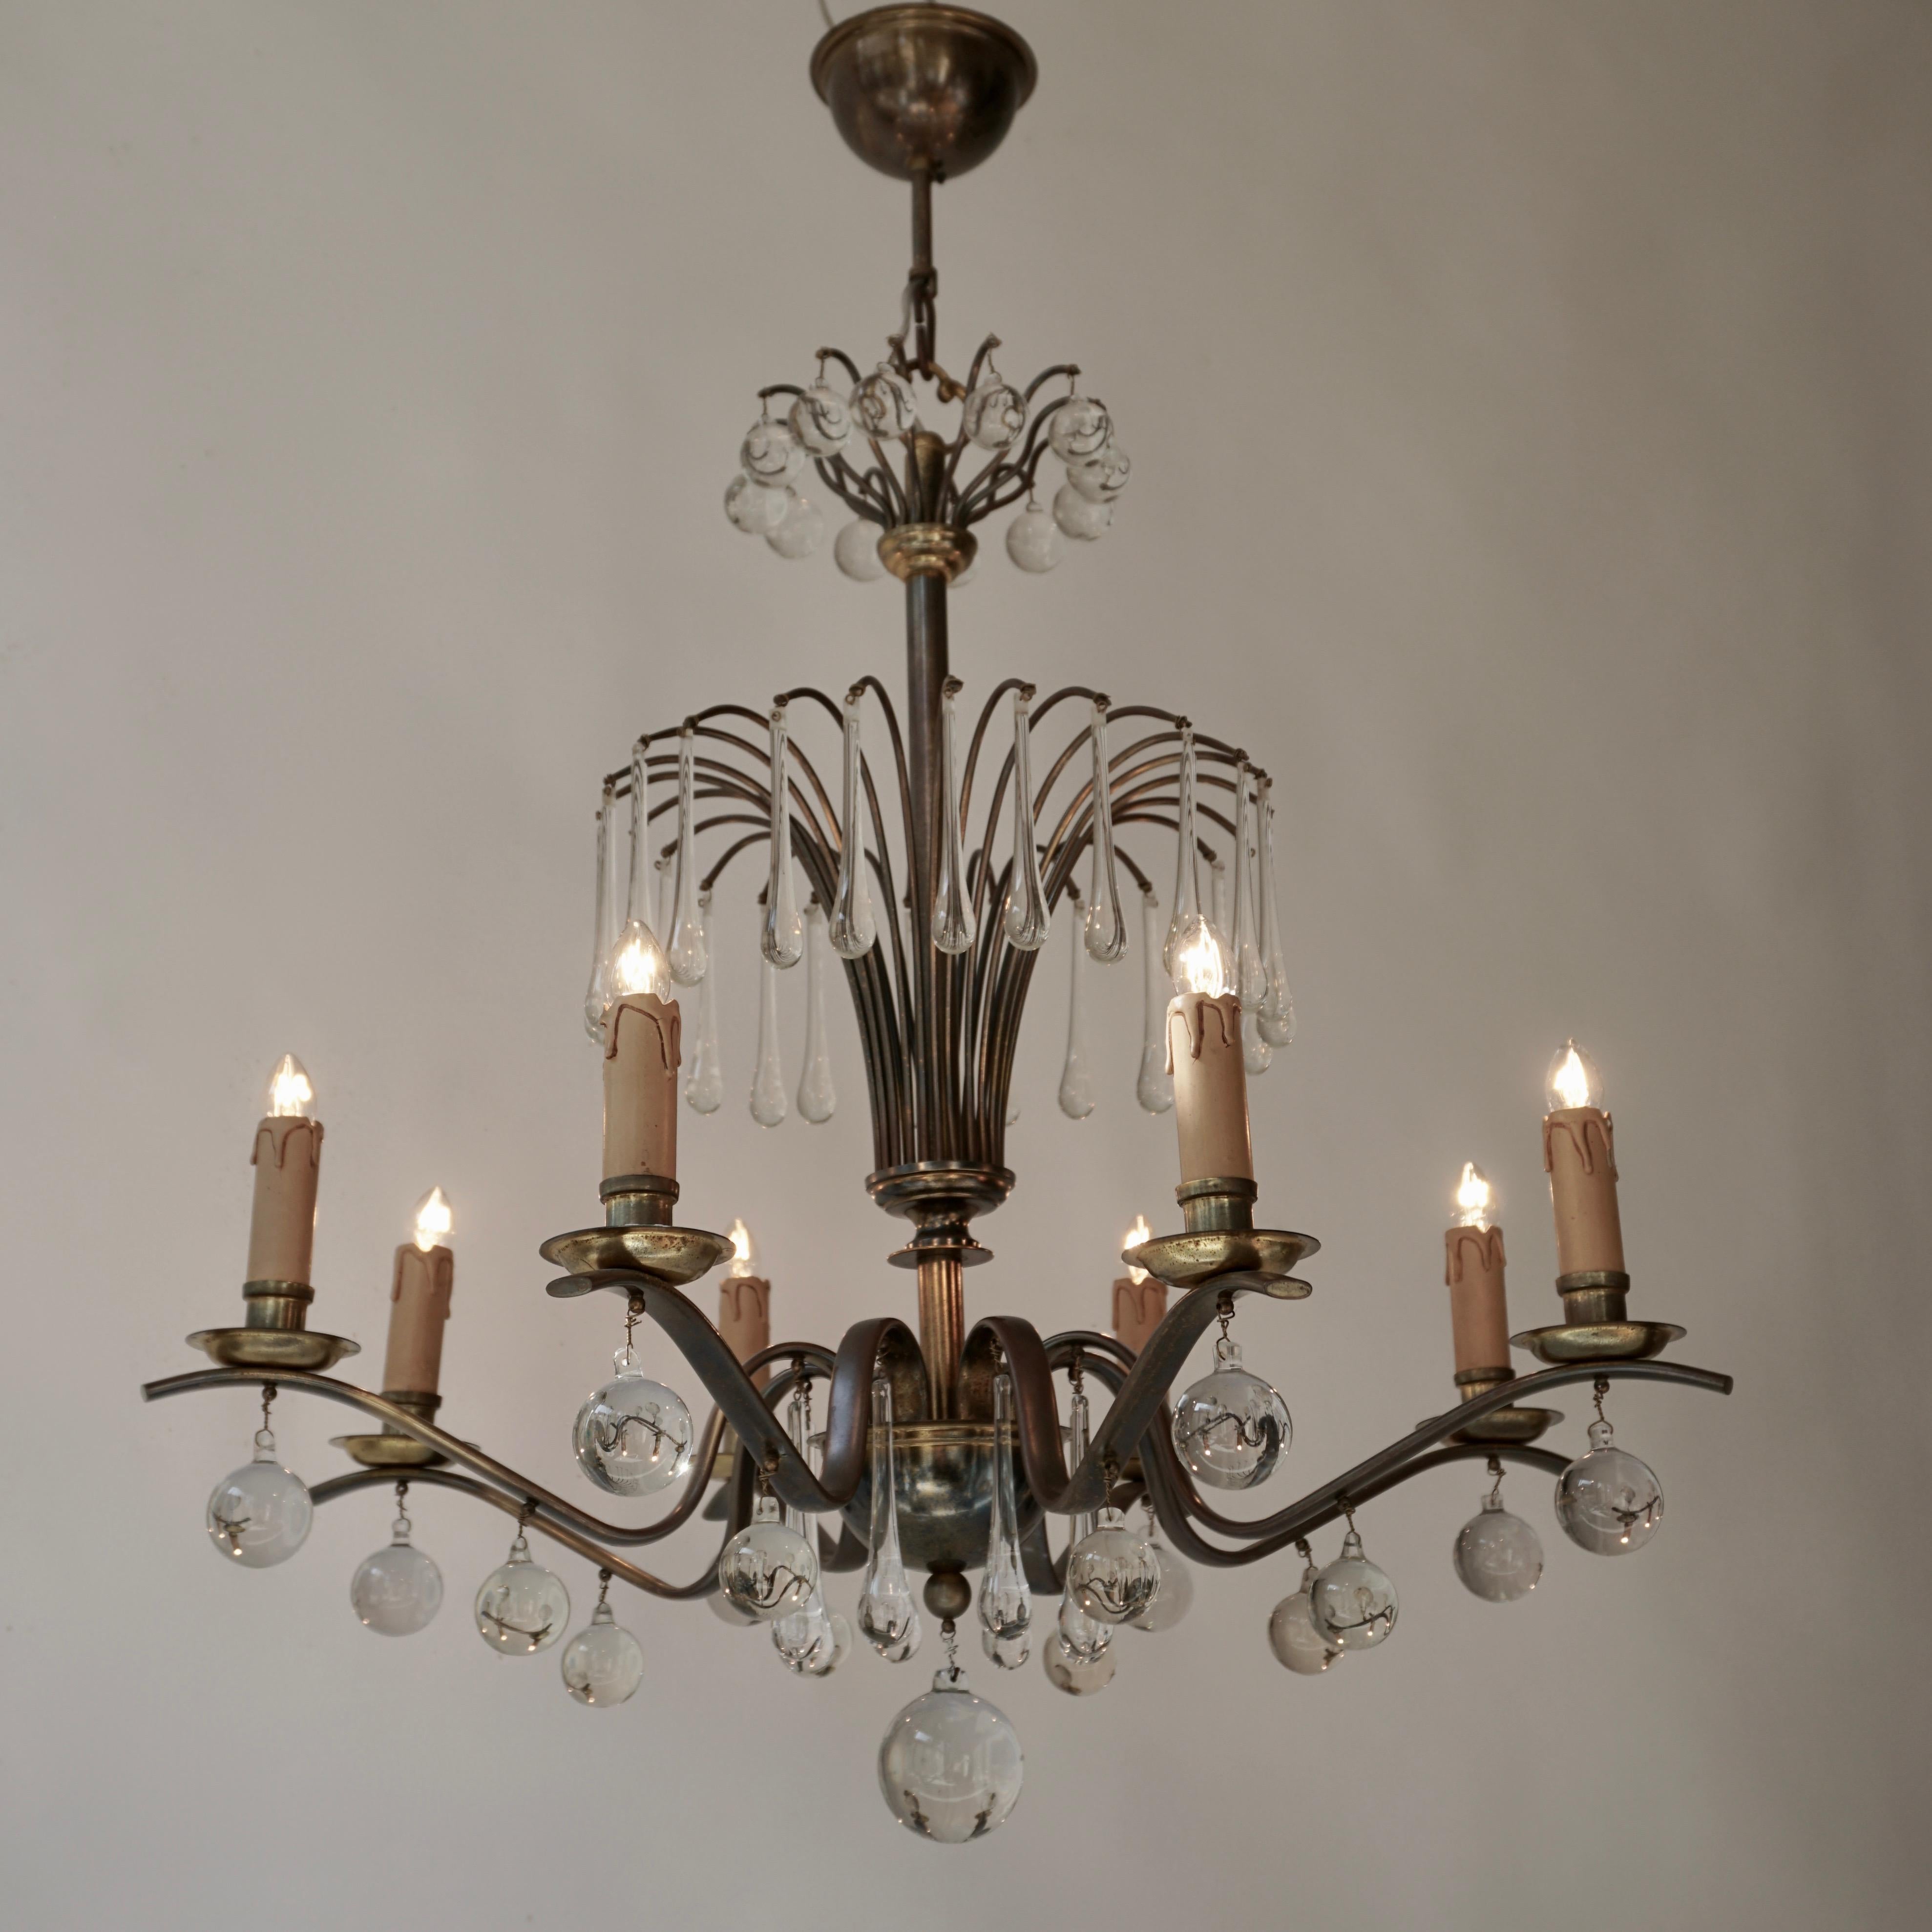 Italian chandelier in brass and glass.
Measures: Diameter 65 cm.
Height fixture 66 cm.
Total height including the chain and canopy 82 cm. Eight E14 bulbs.